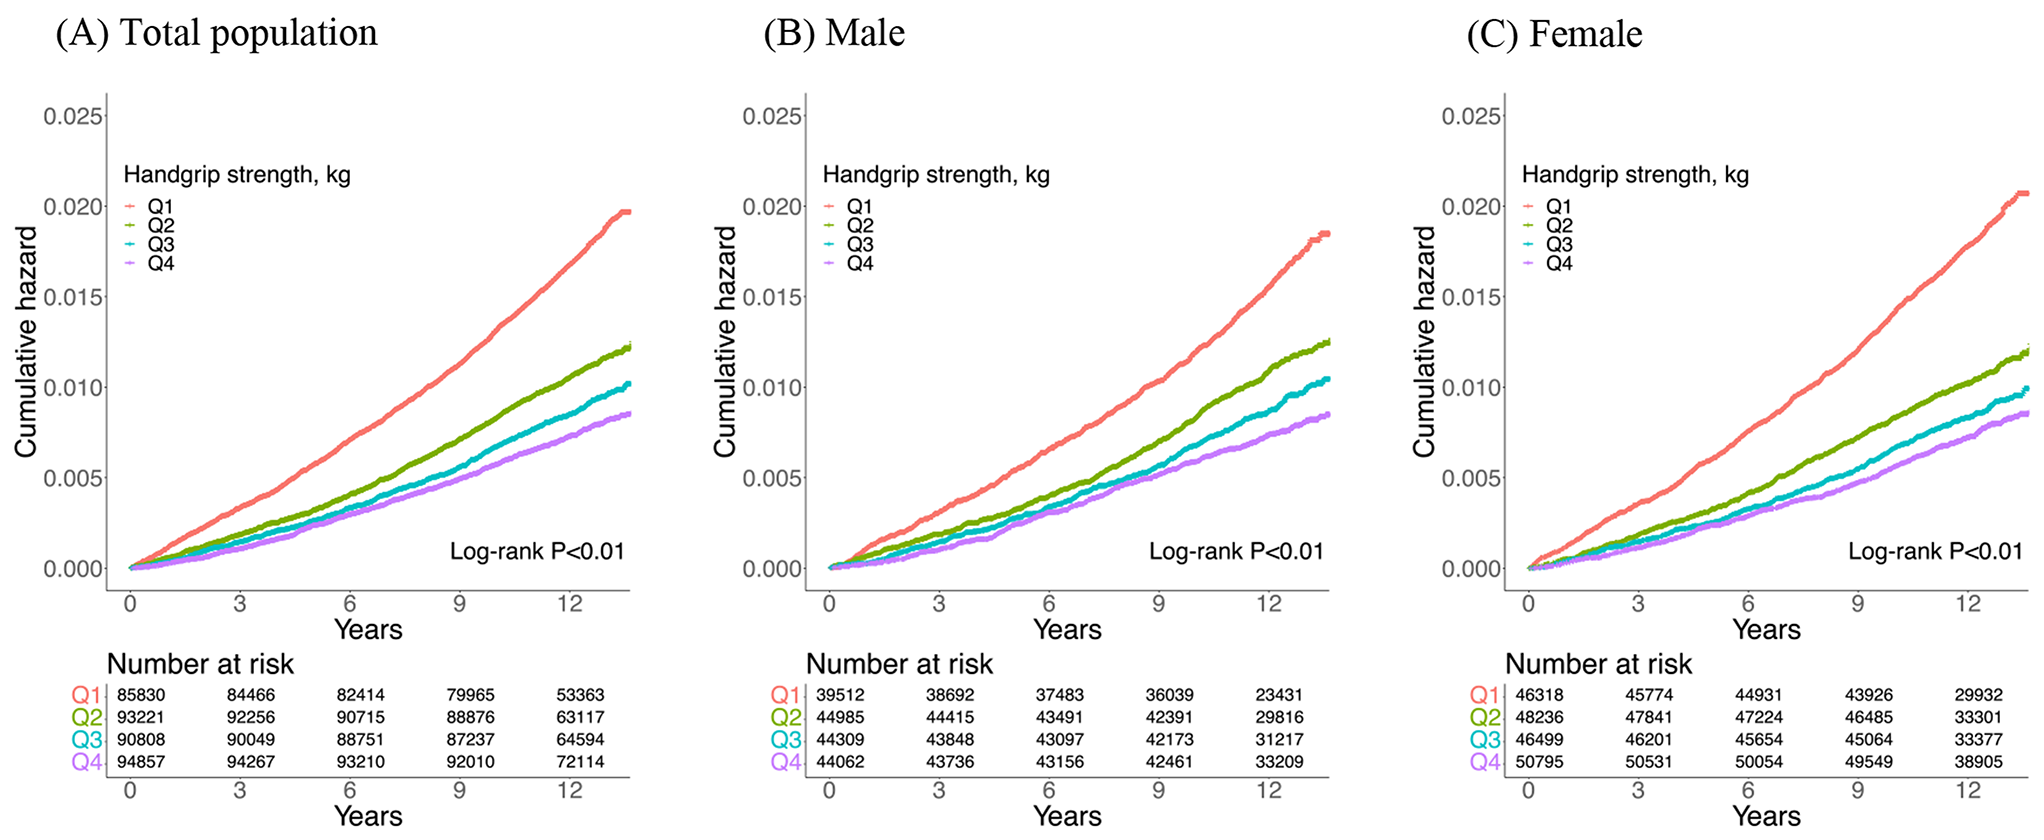 Association between grip strength and walking pace with incidence of degenerative cervical myelopathy: a UK biobank observational study